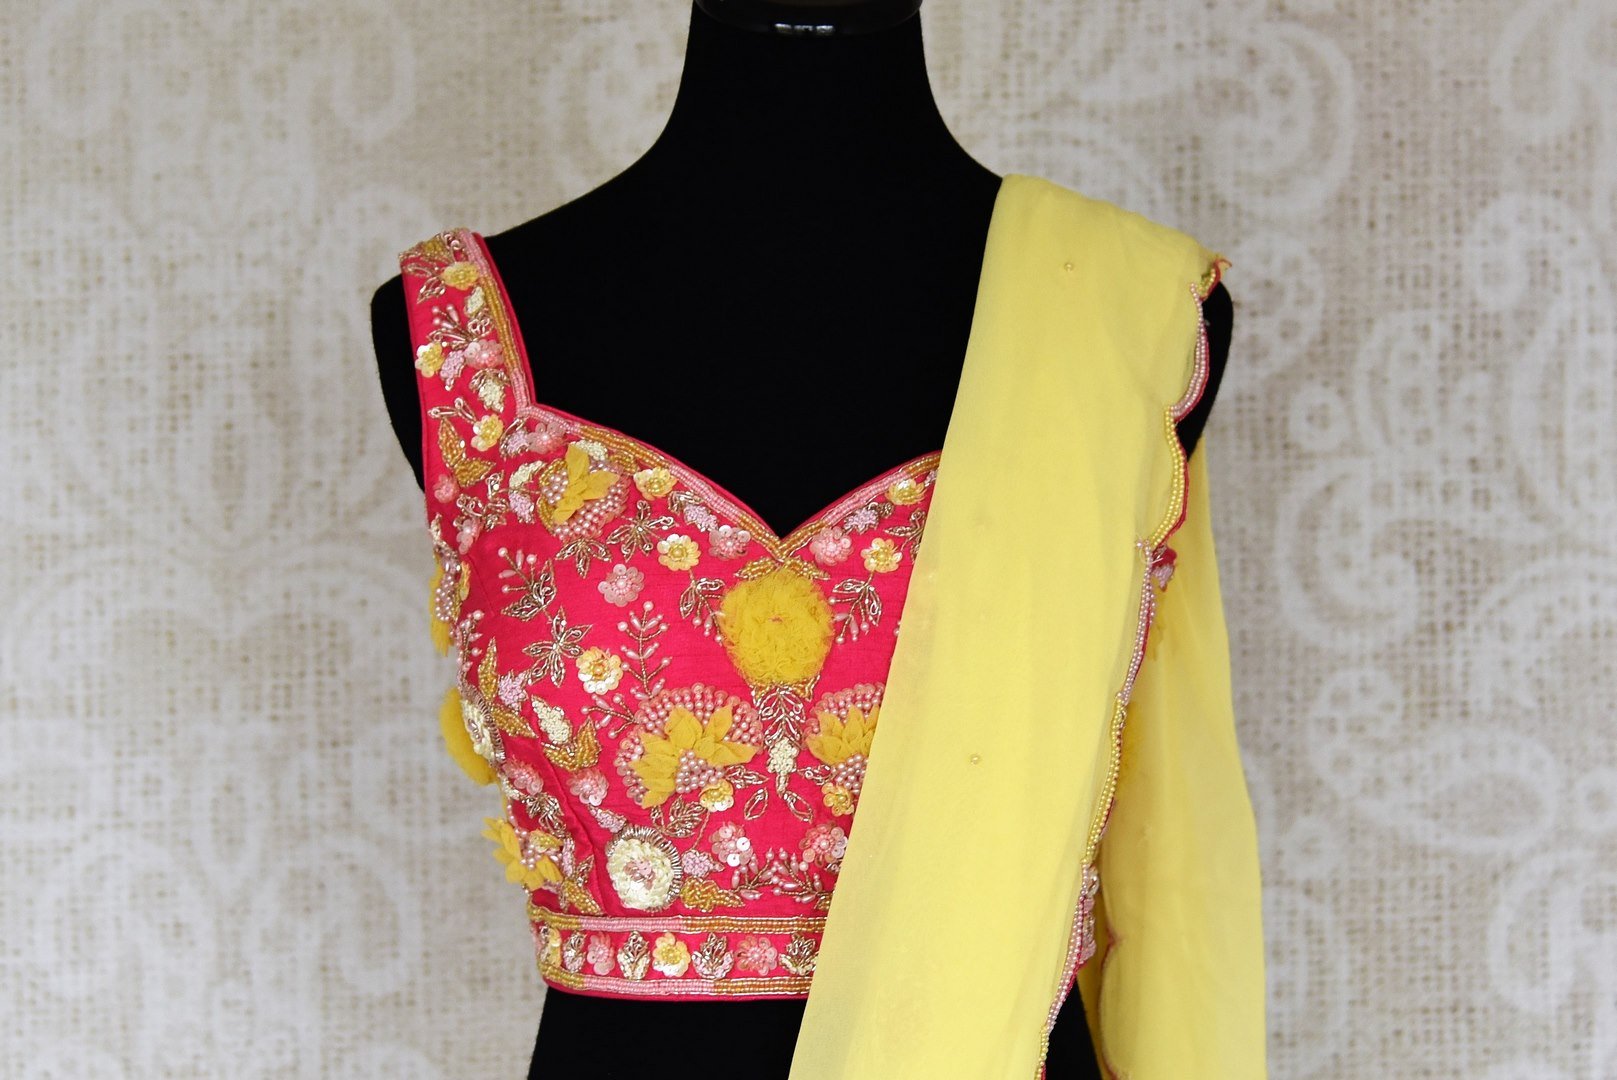 Buy beautiful lemon yellow embroidered georgette saree online in USA with pink embroidered blouse. Look your best at weddings and parties in Indian sarees, designer saris, printed sarees, embroidered sarees from Pure Elegance Indian fashion store in USA.-closeup